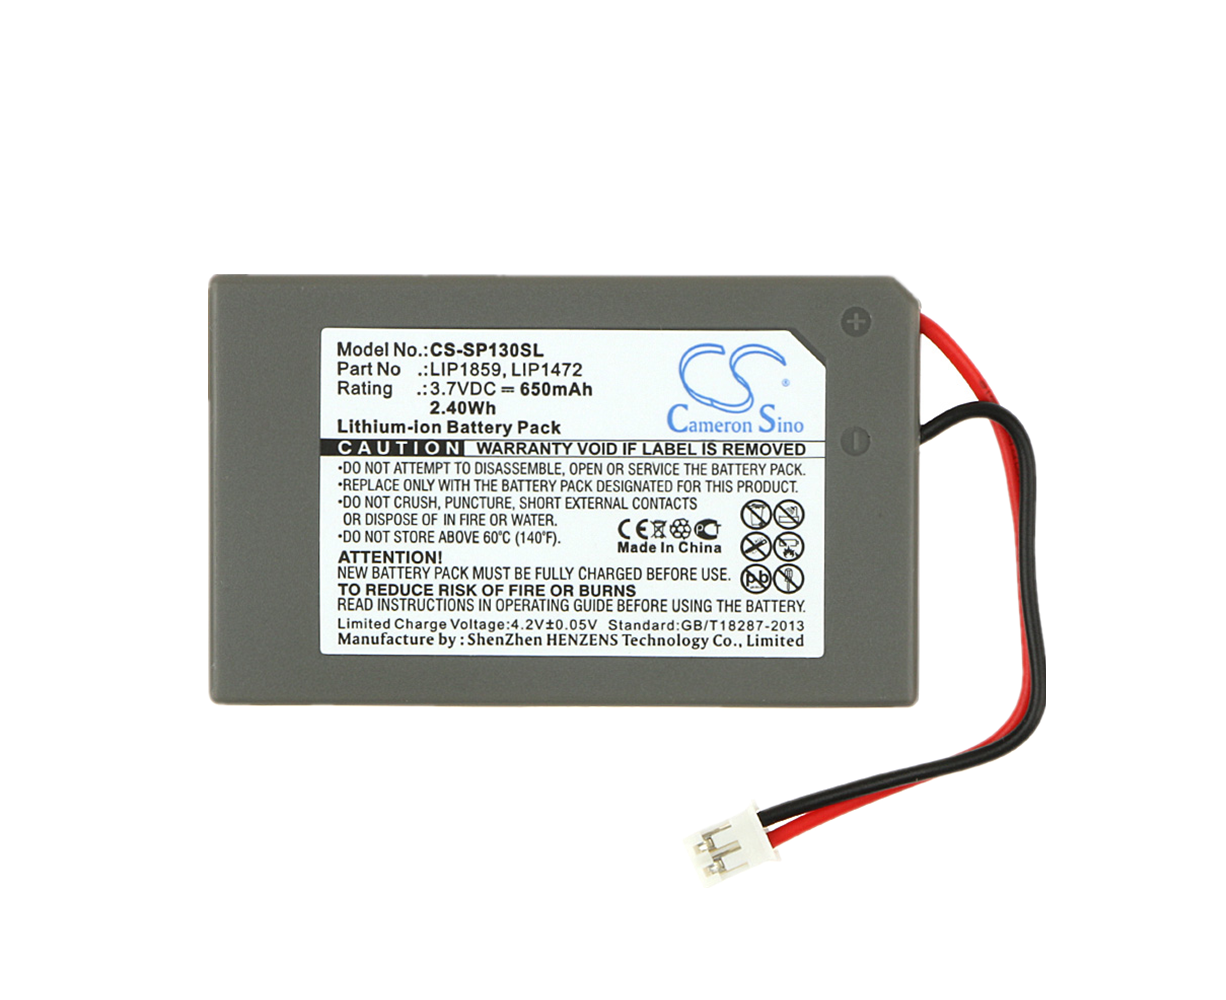 Sony PCH-1001 PCH-1006 PCH-1101 PlayStation Vita PS Vita Game Replacement  Battery